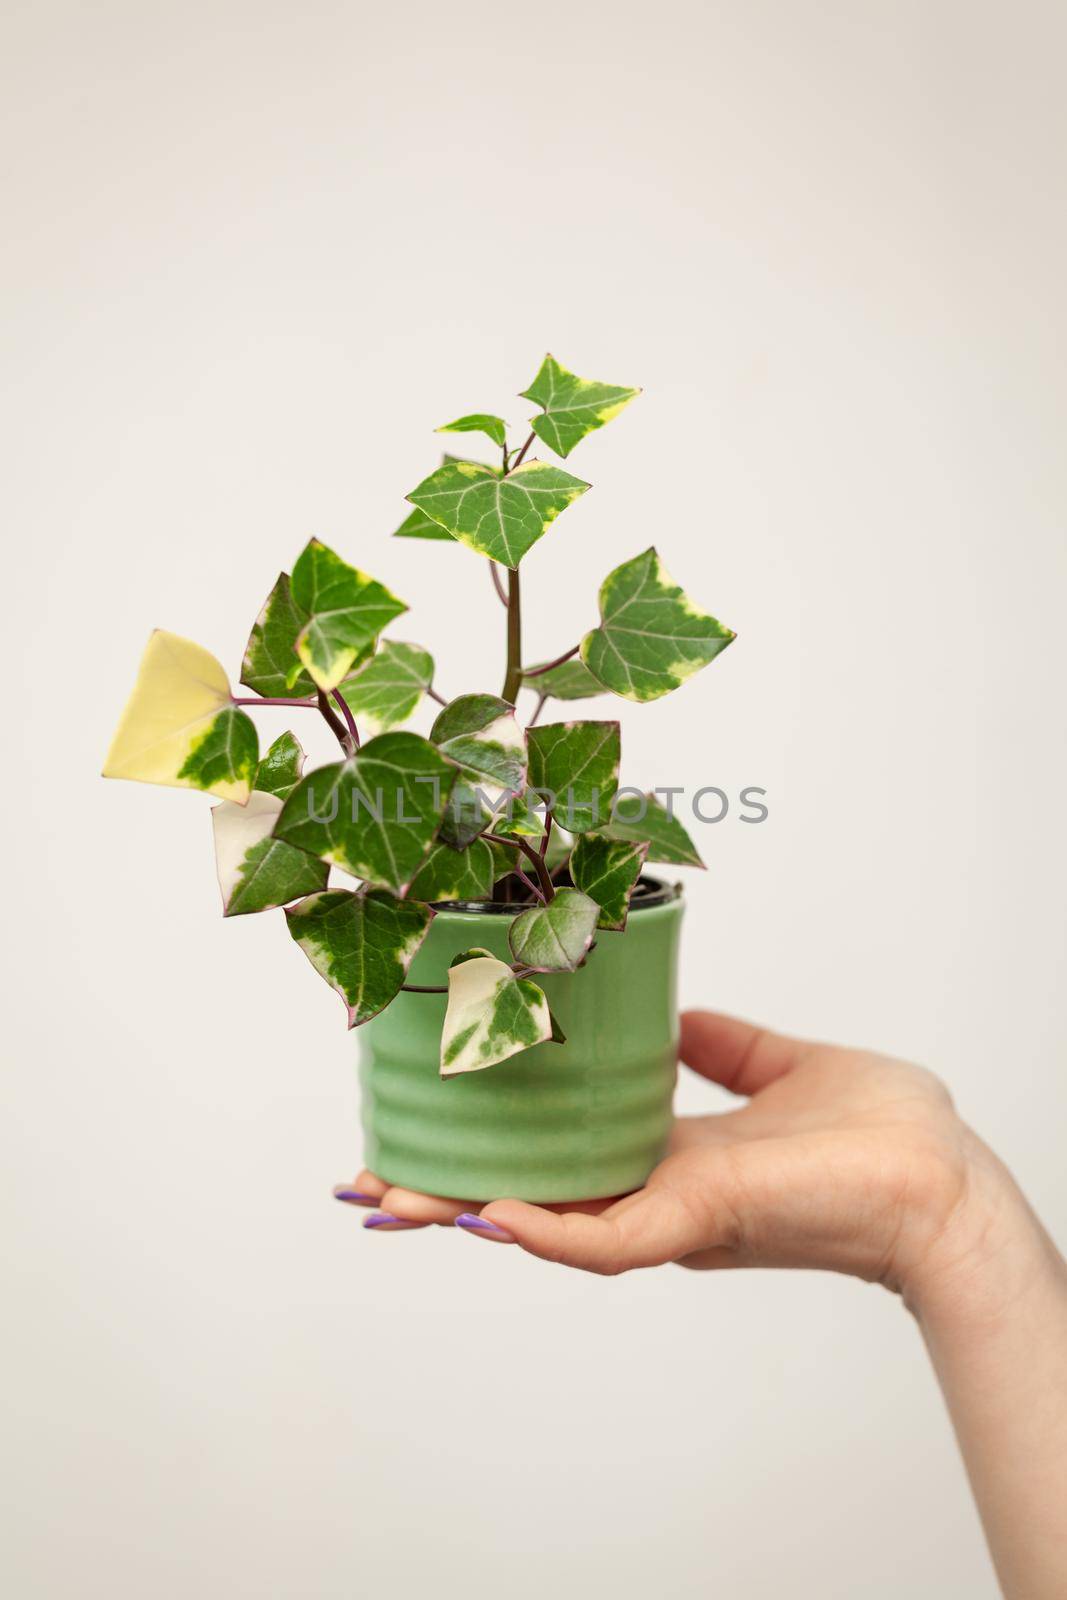 Hand holding pot with Senecio macroglossus plant, the Natal ivy or wax ivy. It is an evergreen climber with waxy triangular leaves.